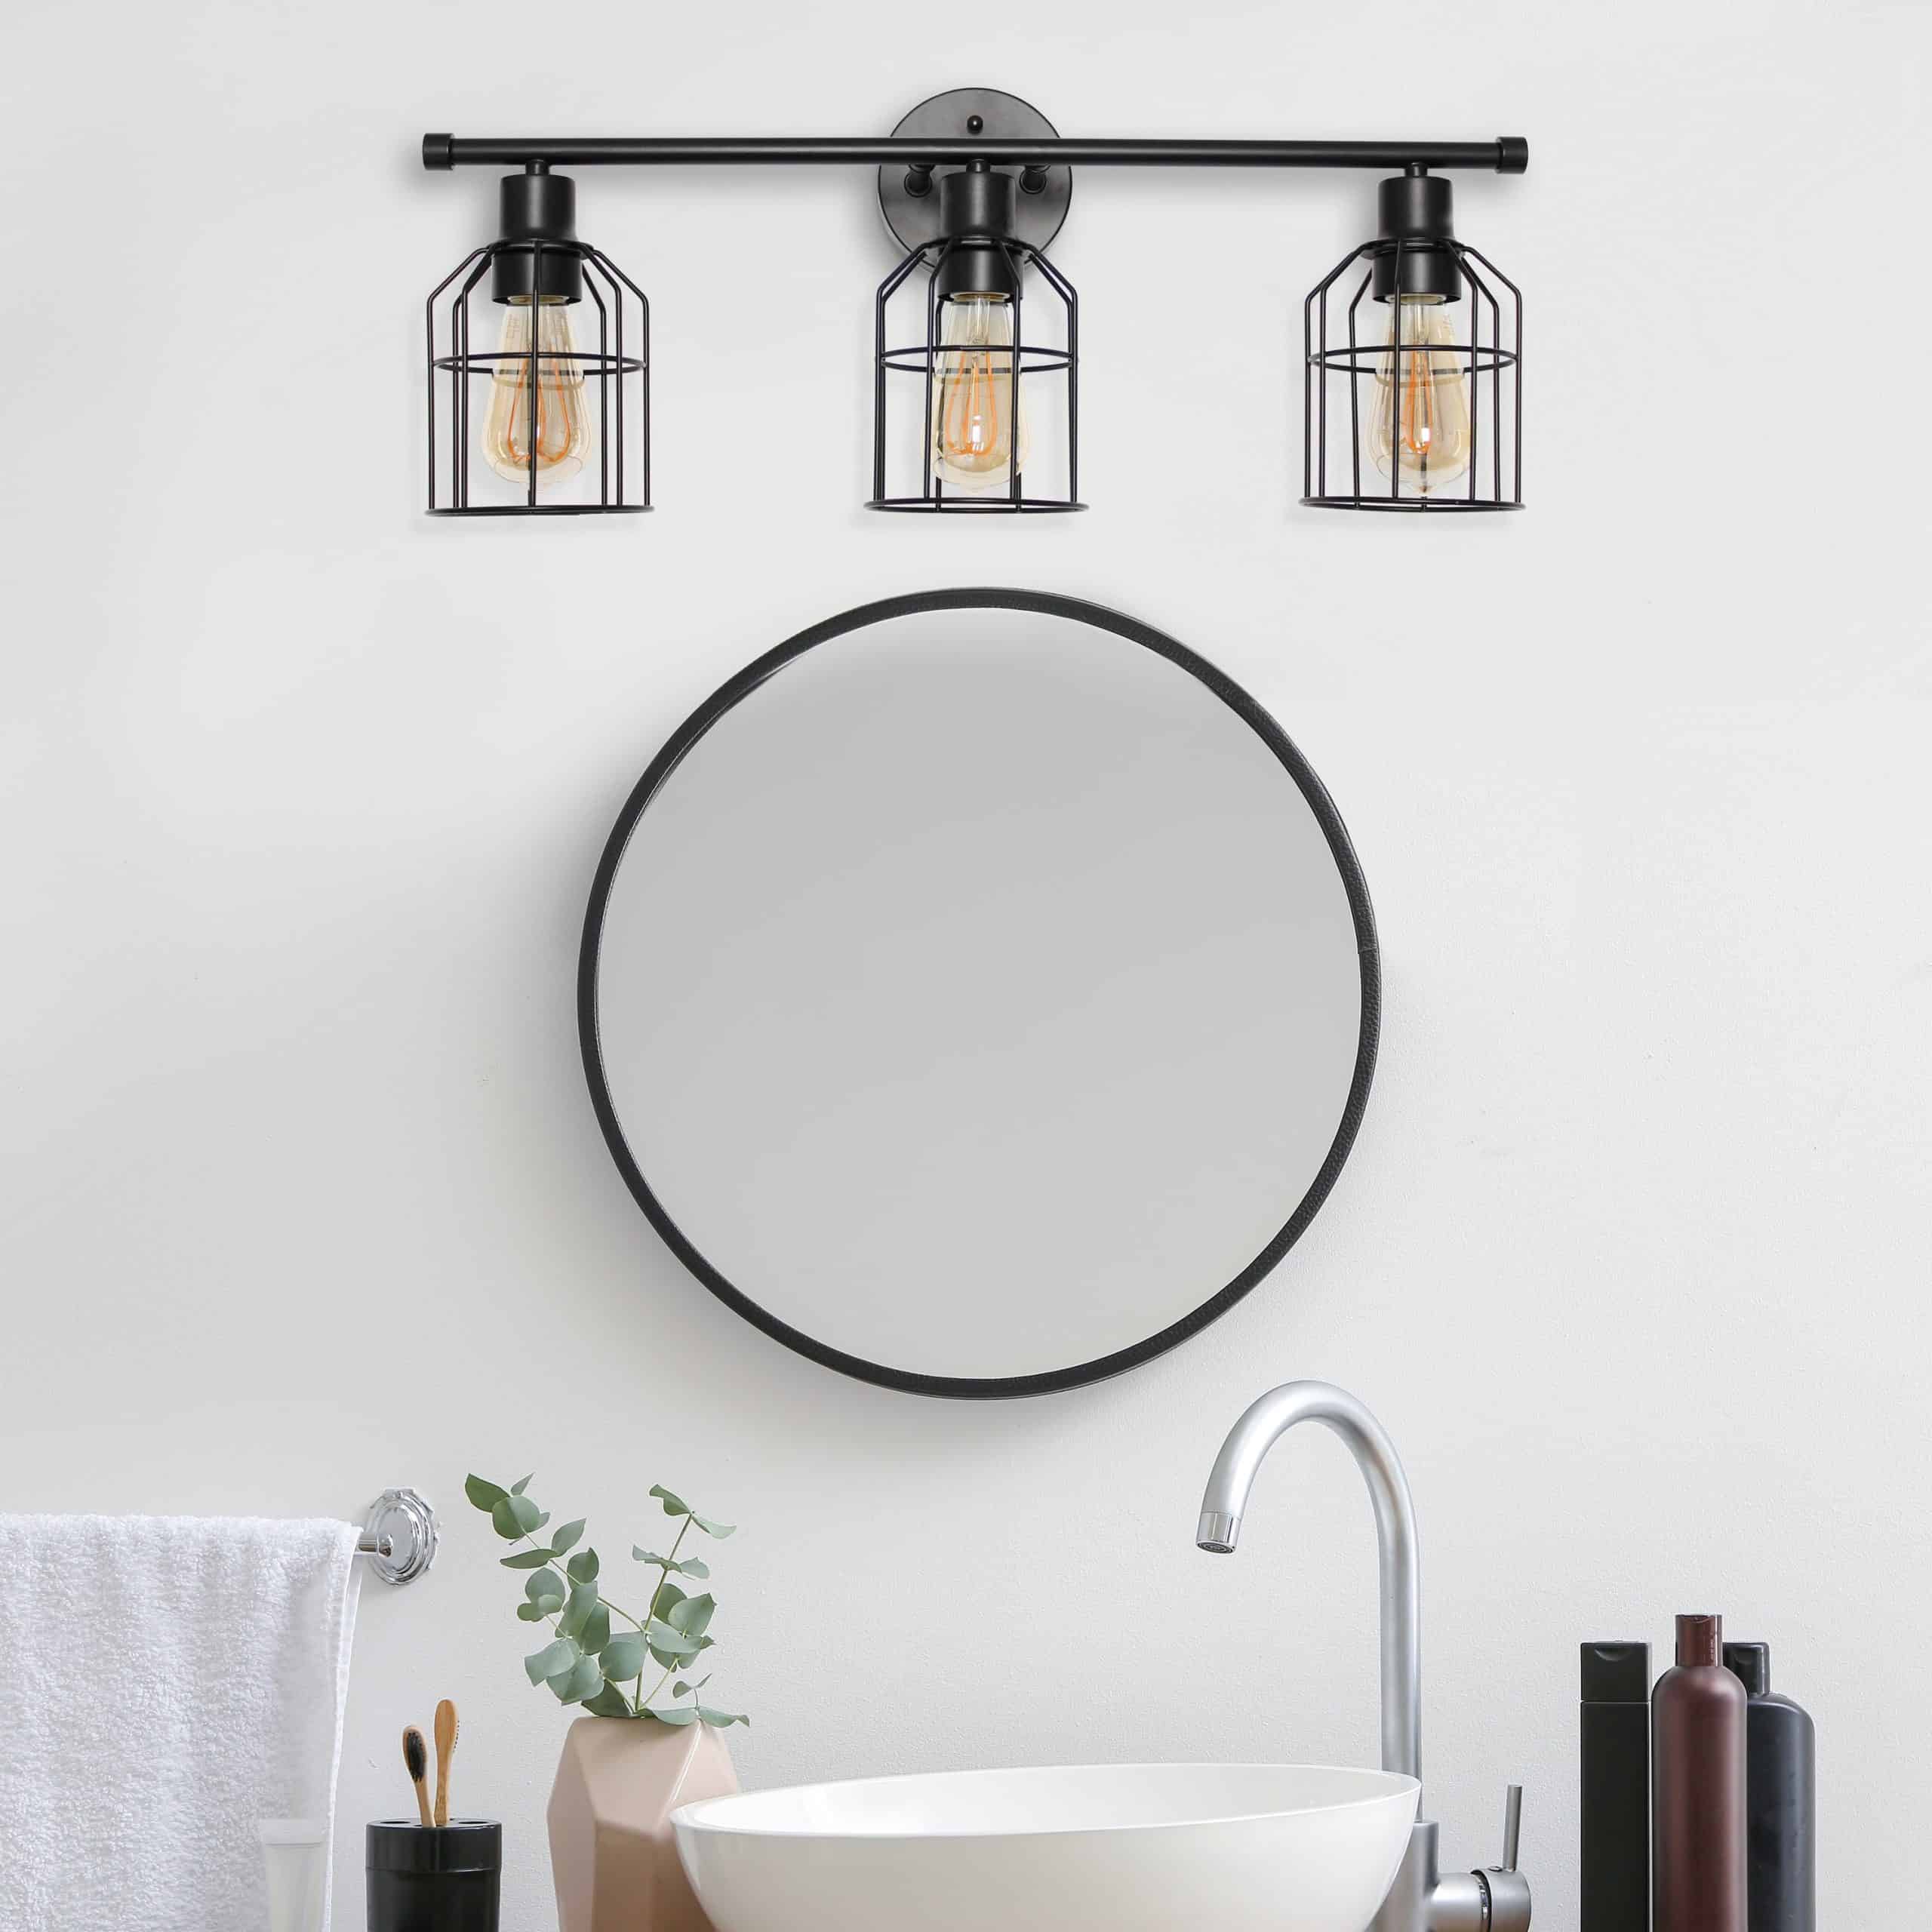 Add An Industrial Vibe With Metal Sconces